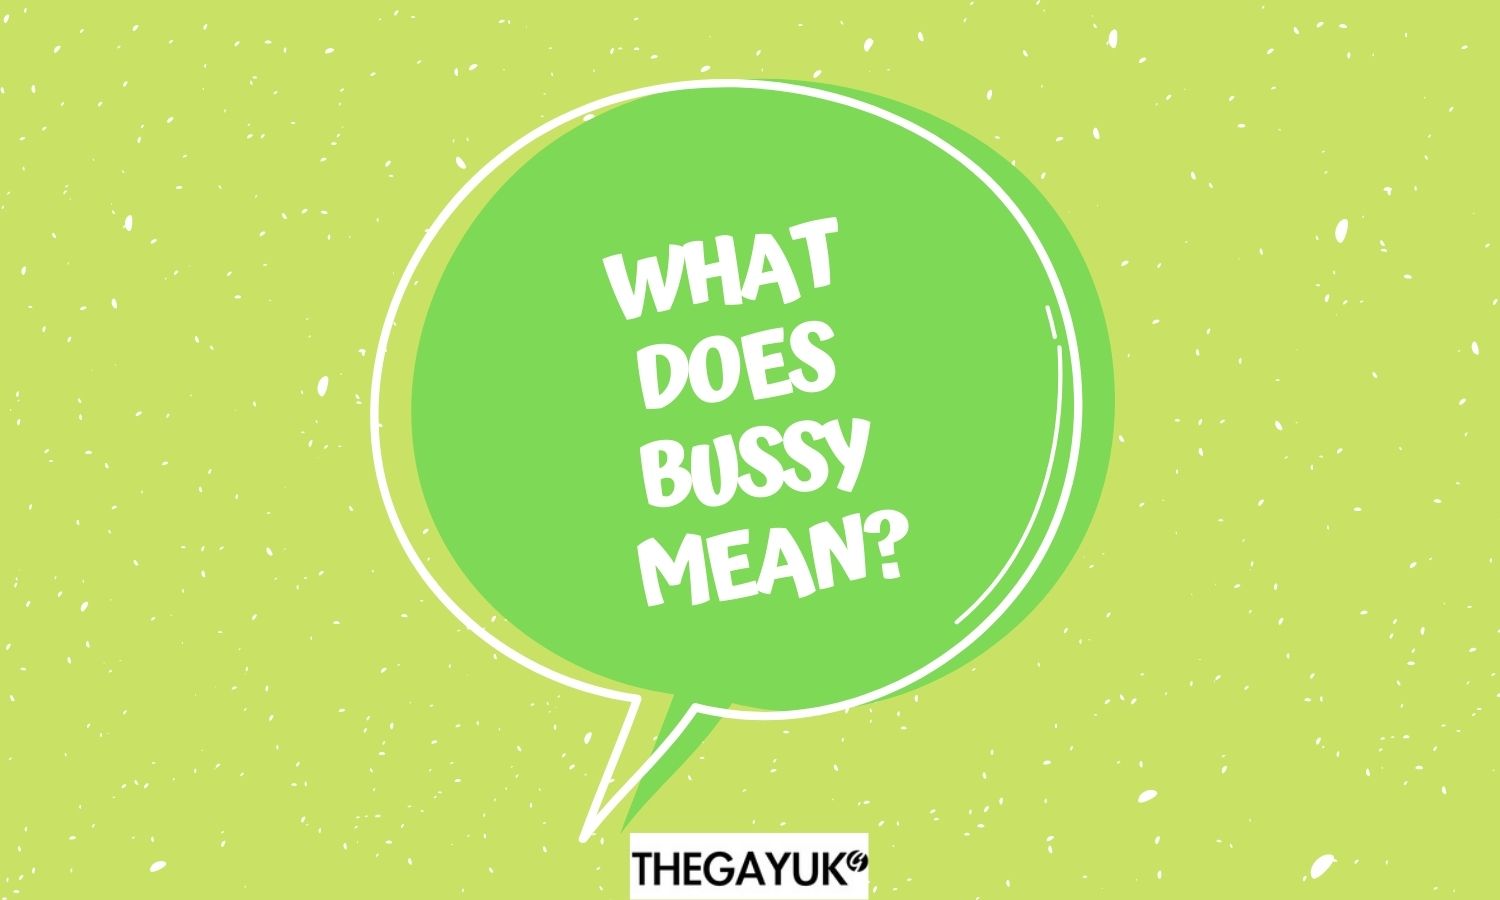 alexis pia share what does bussy mean photos